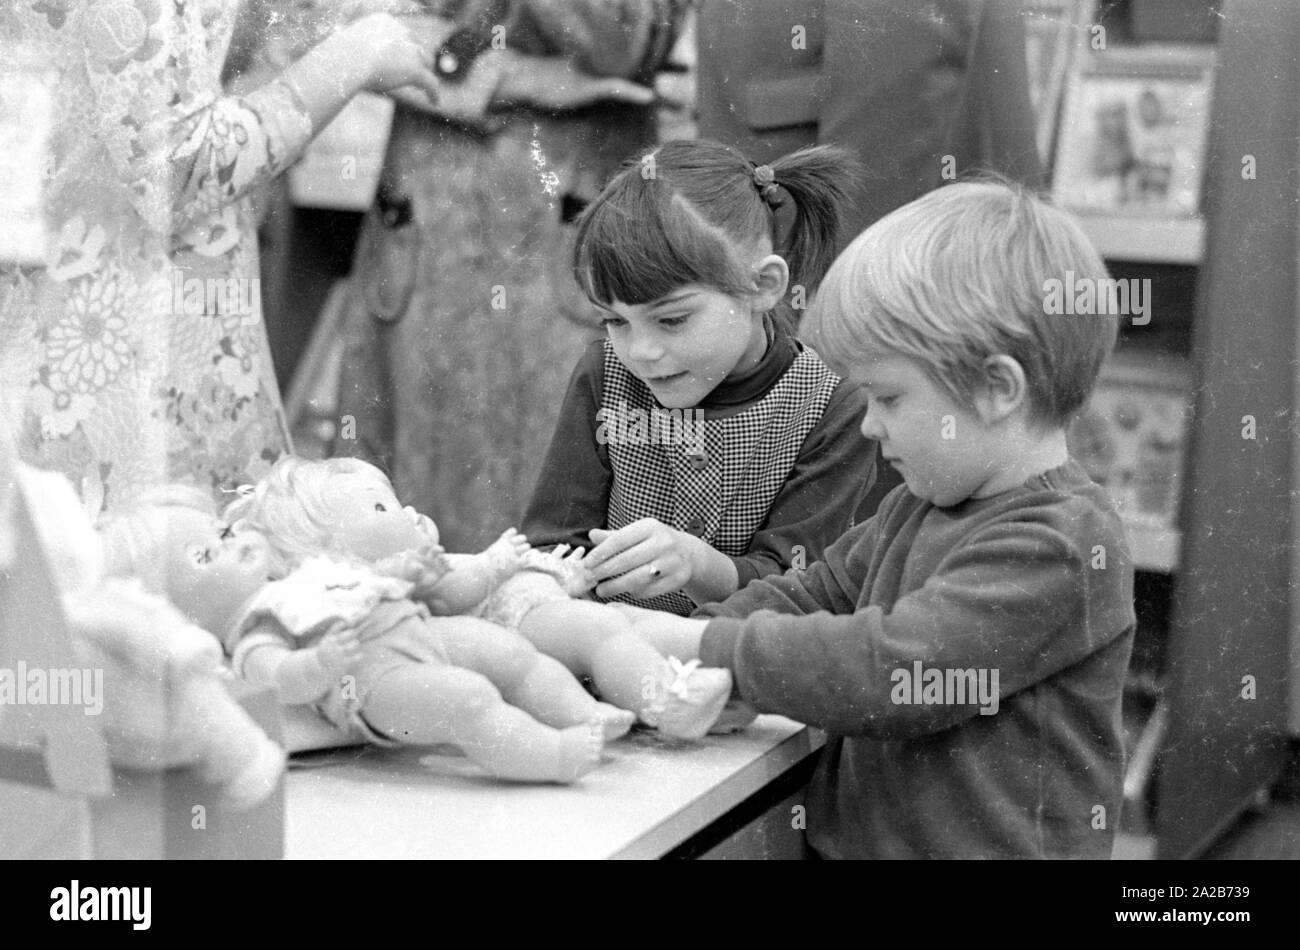 Two children look at dolls of the brand 'Matell' at the Nuremberg Toy Fair, which took place between 06.02.-12.02.1971. Stock Photo